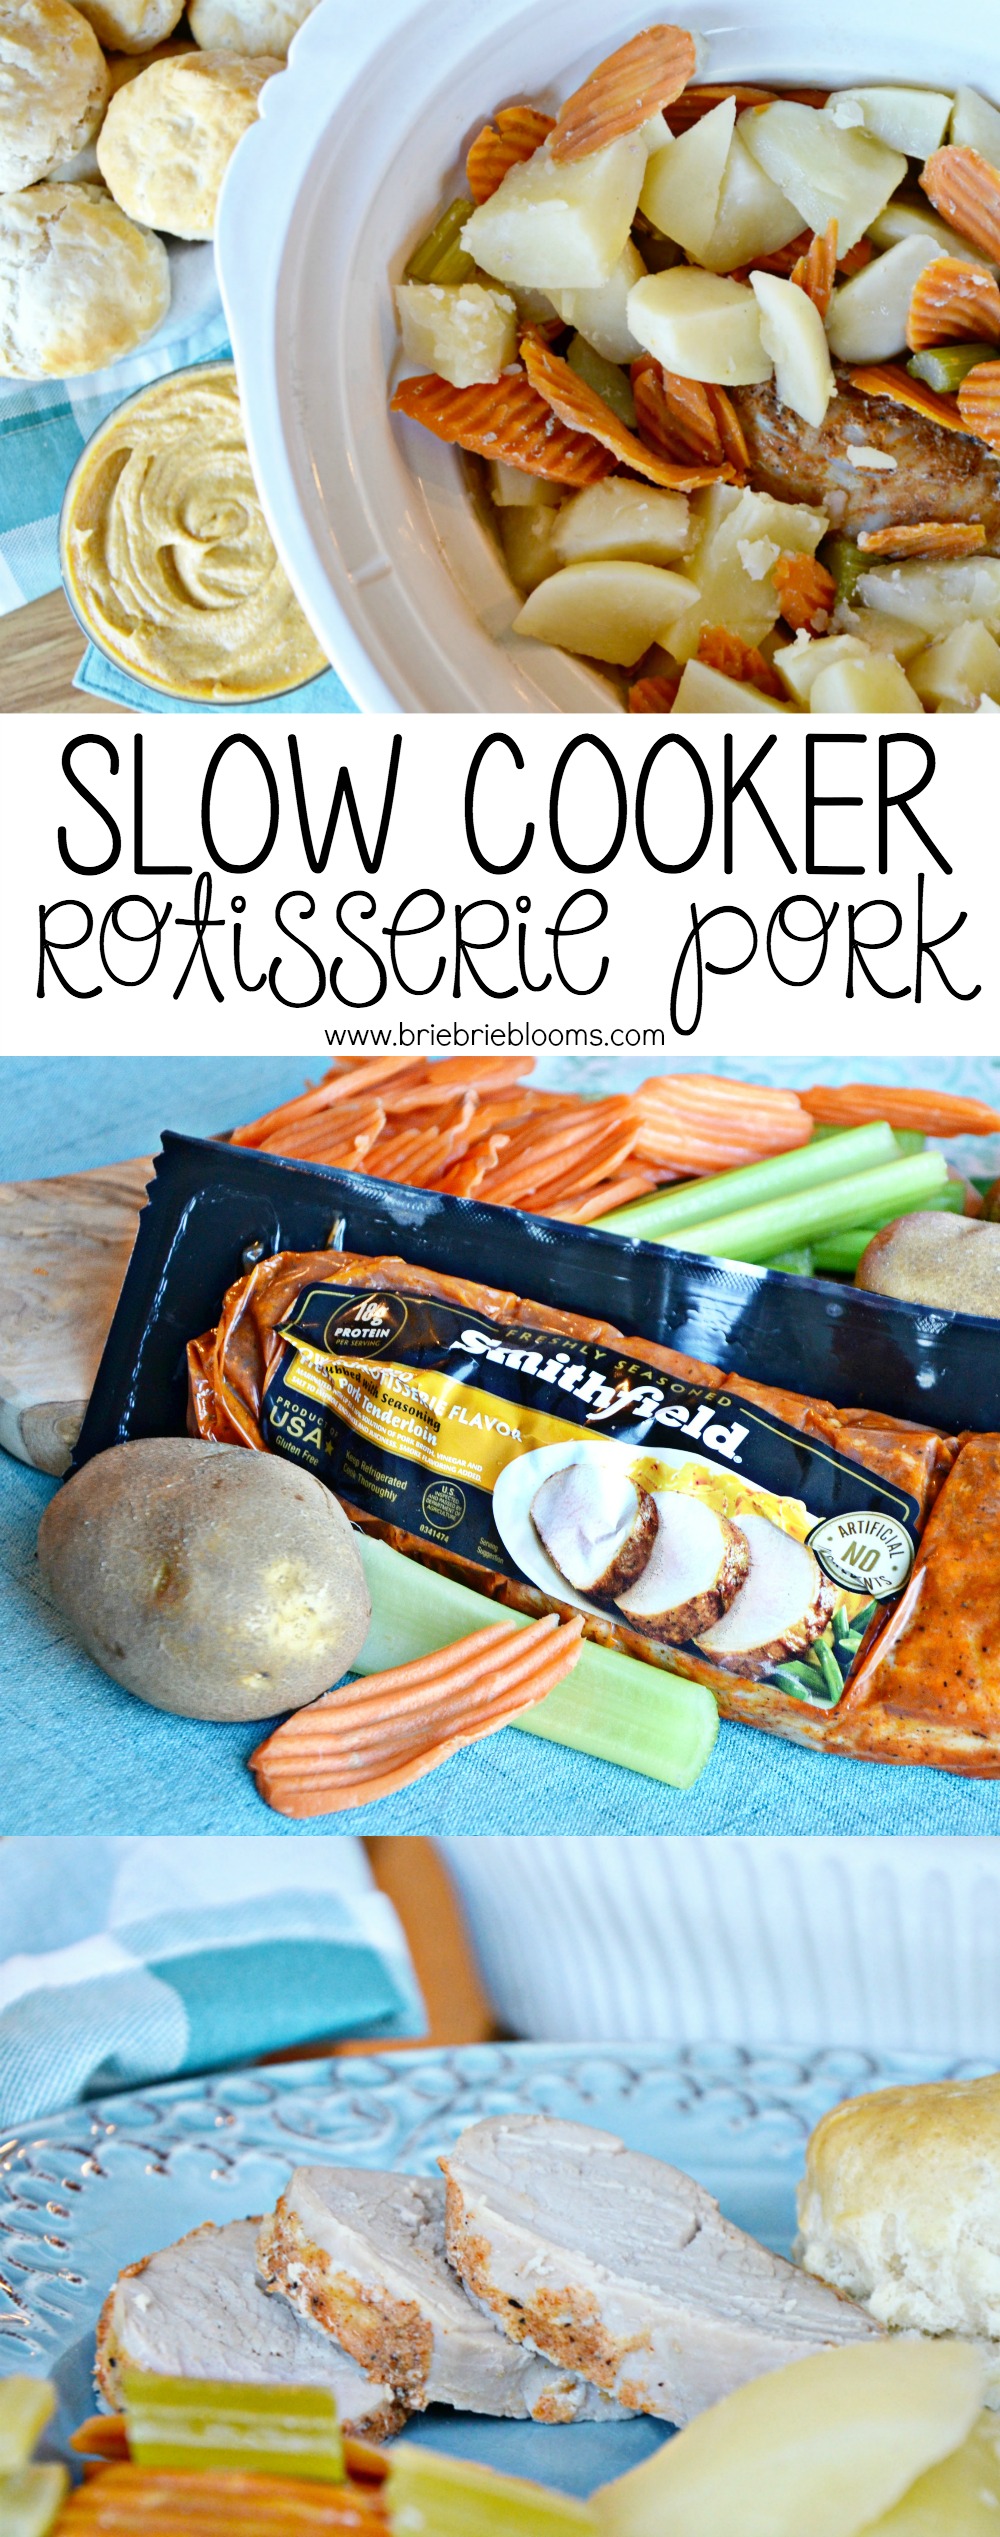 Make this easy slow cooker rotisserie pork on your busiest days so your family can enjoy a meal together.